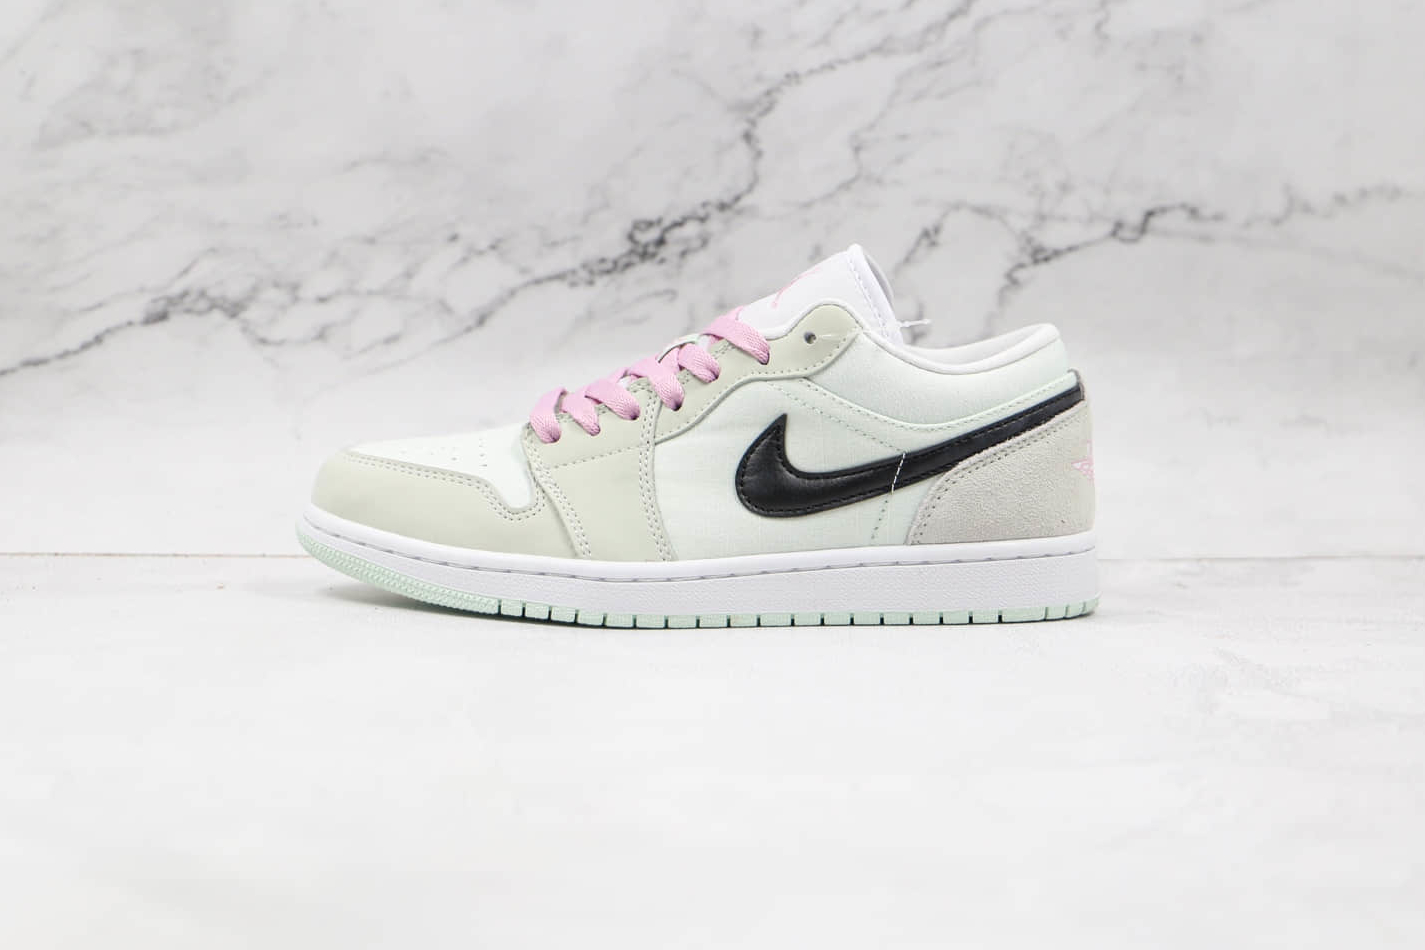 Air Jordan 1 Low SE 'Barely Green' CZ0776-300 - Stylish and Trendy Sneakers for Sale